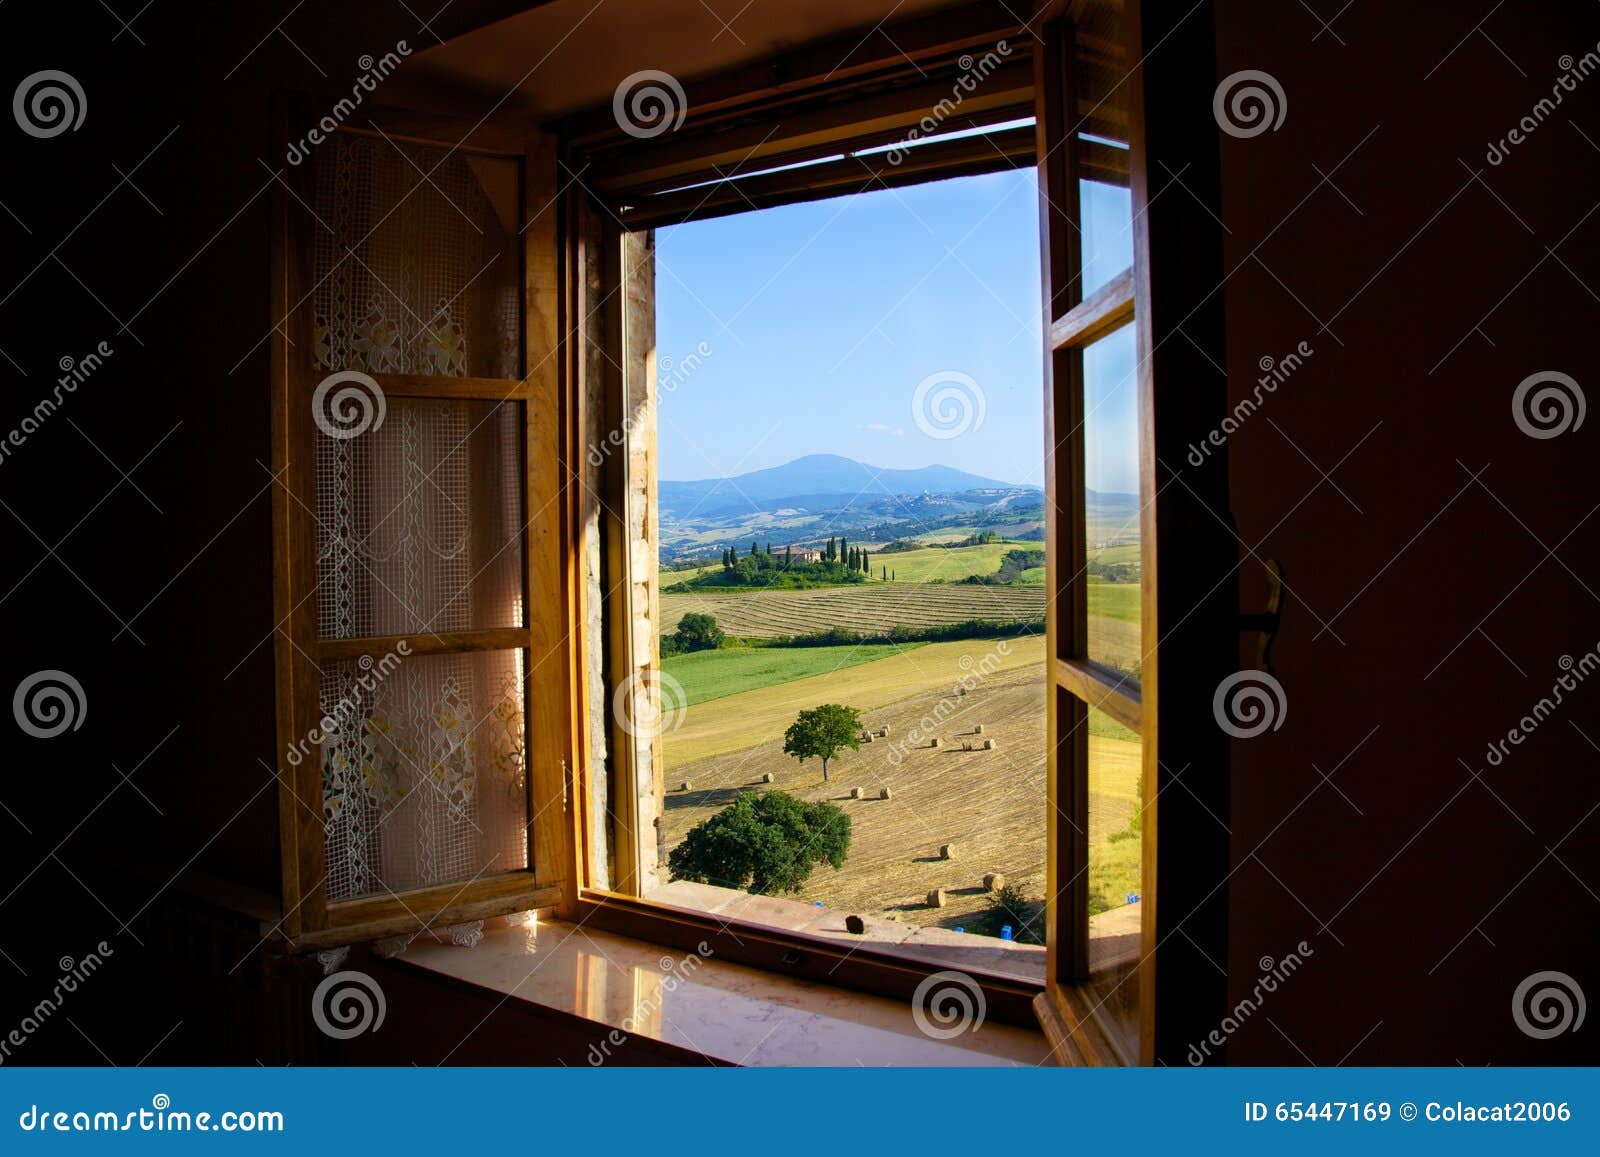 farm in pienza , most beautiful town in val d'orcia area, province of siena, italy